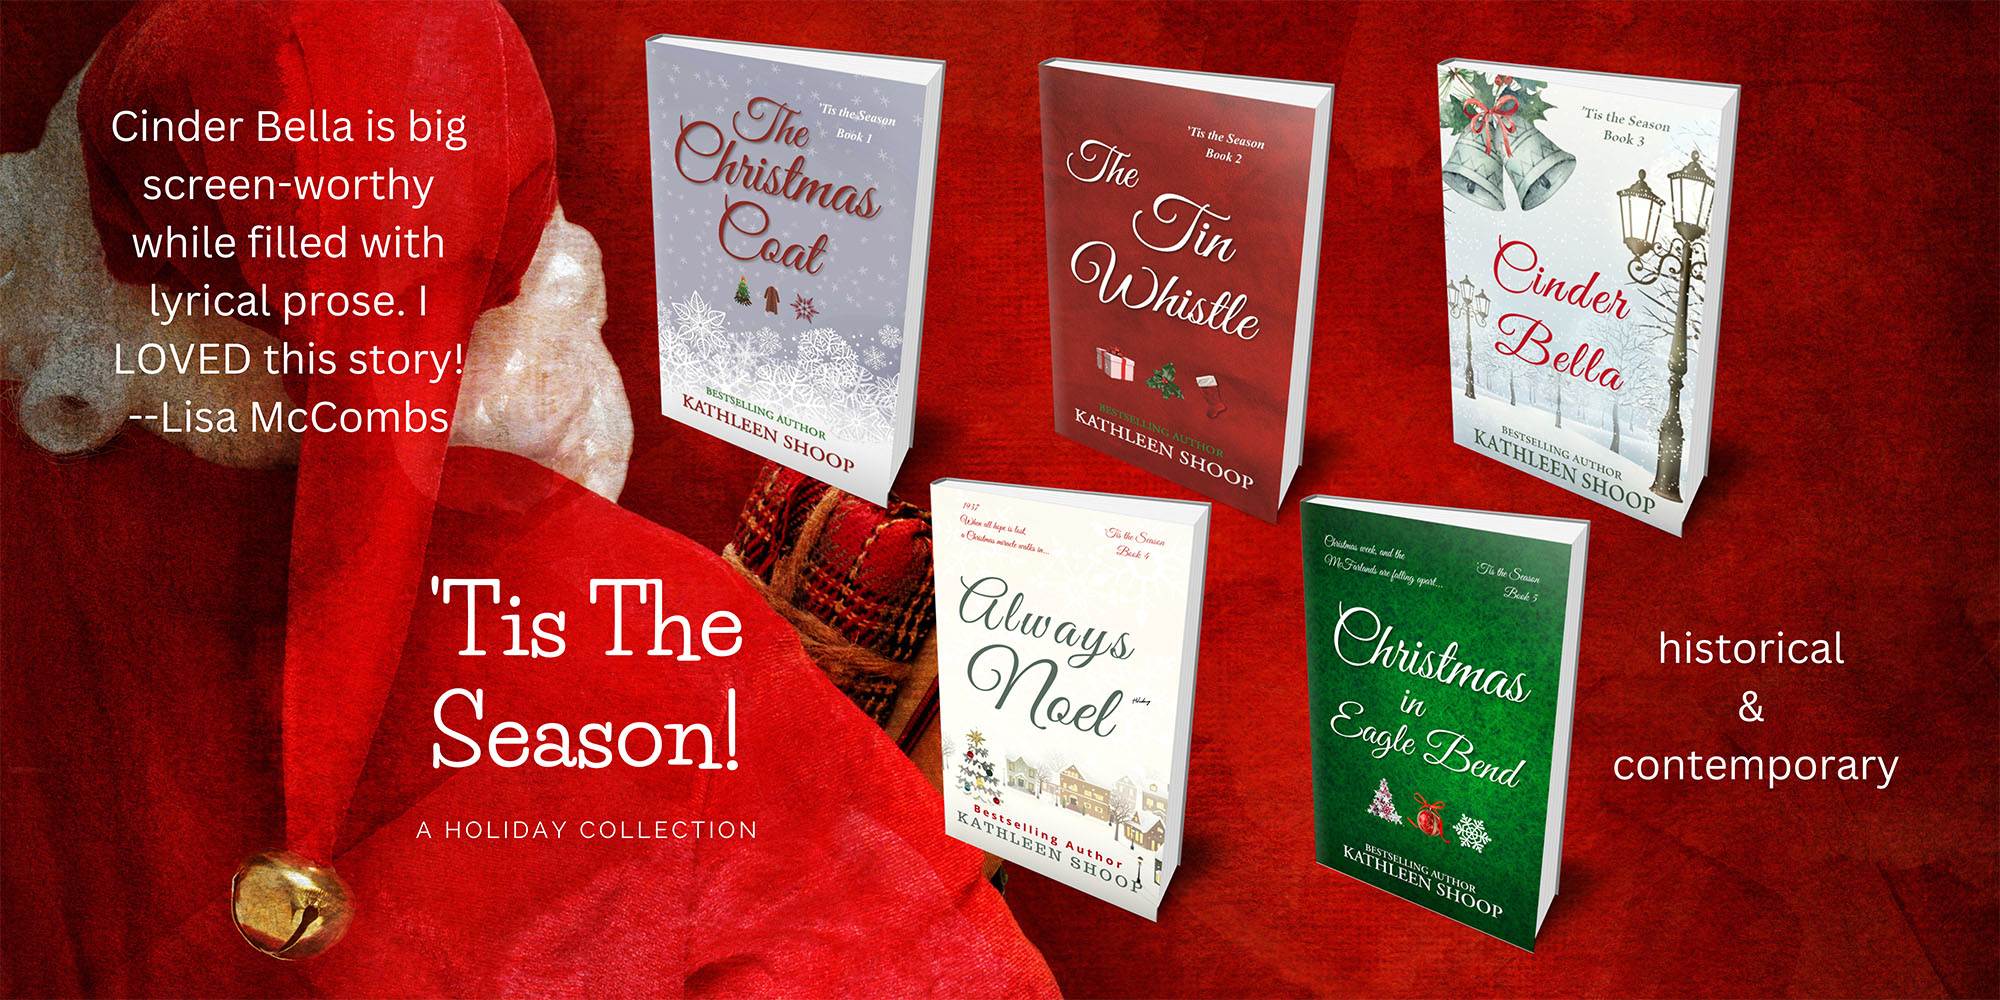 Holiday books by Kathleen Shoop